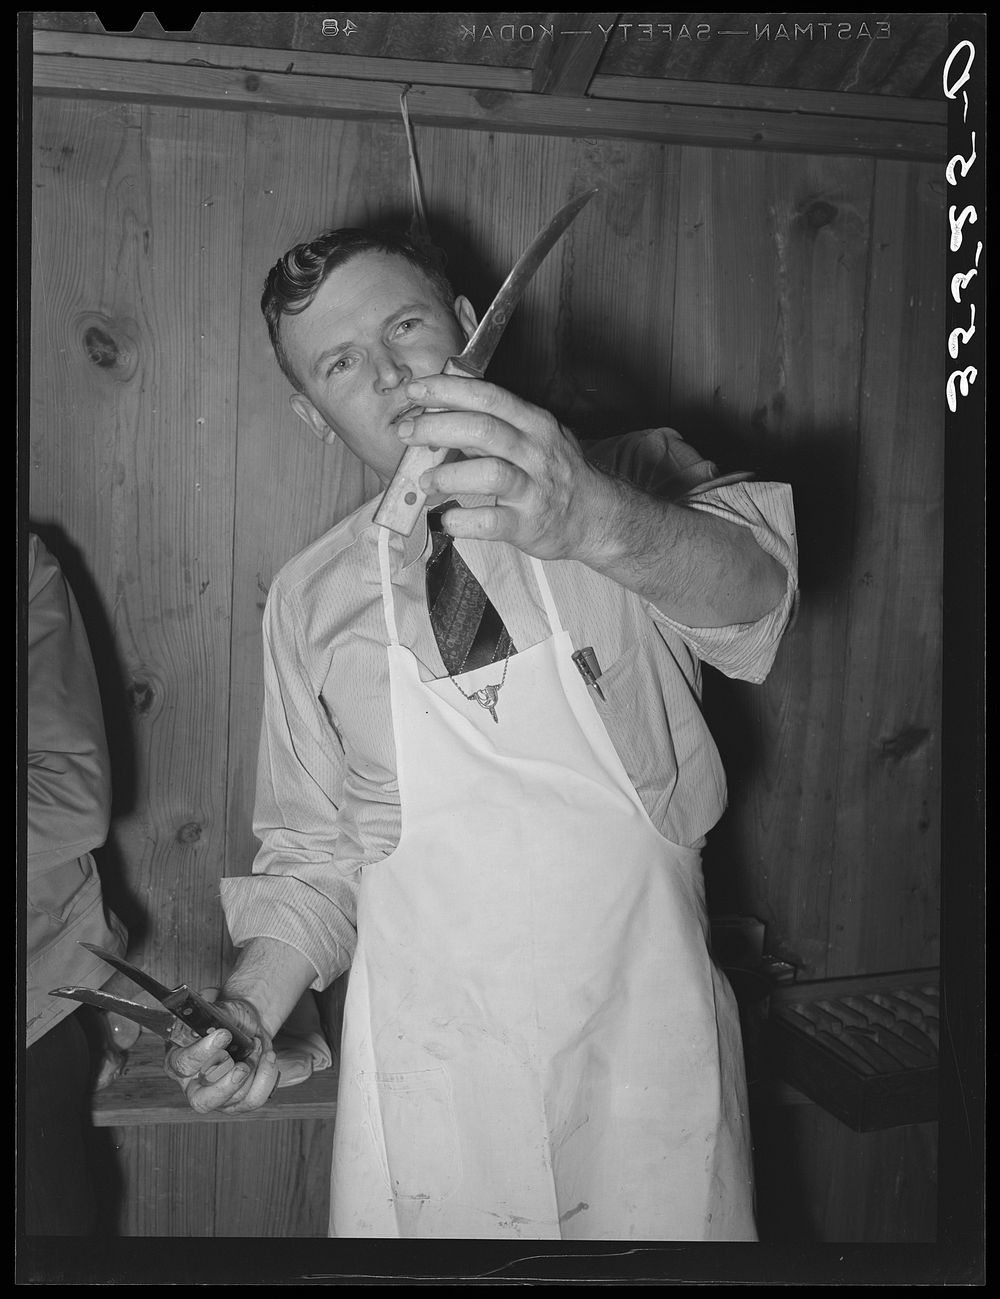 FSA (Farm Security Administration) supervisor exhibiting the type of knife used in his meat cutting demonstration before a…